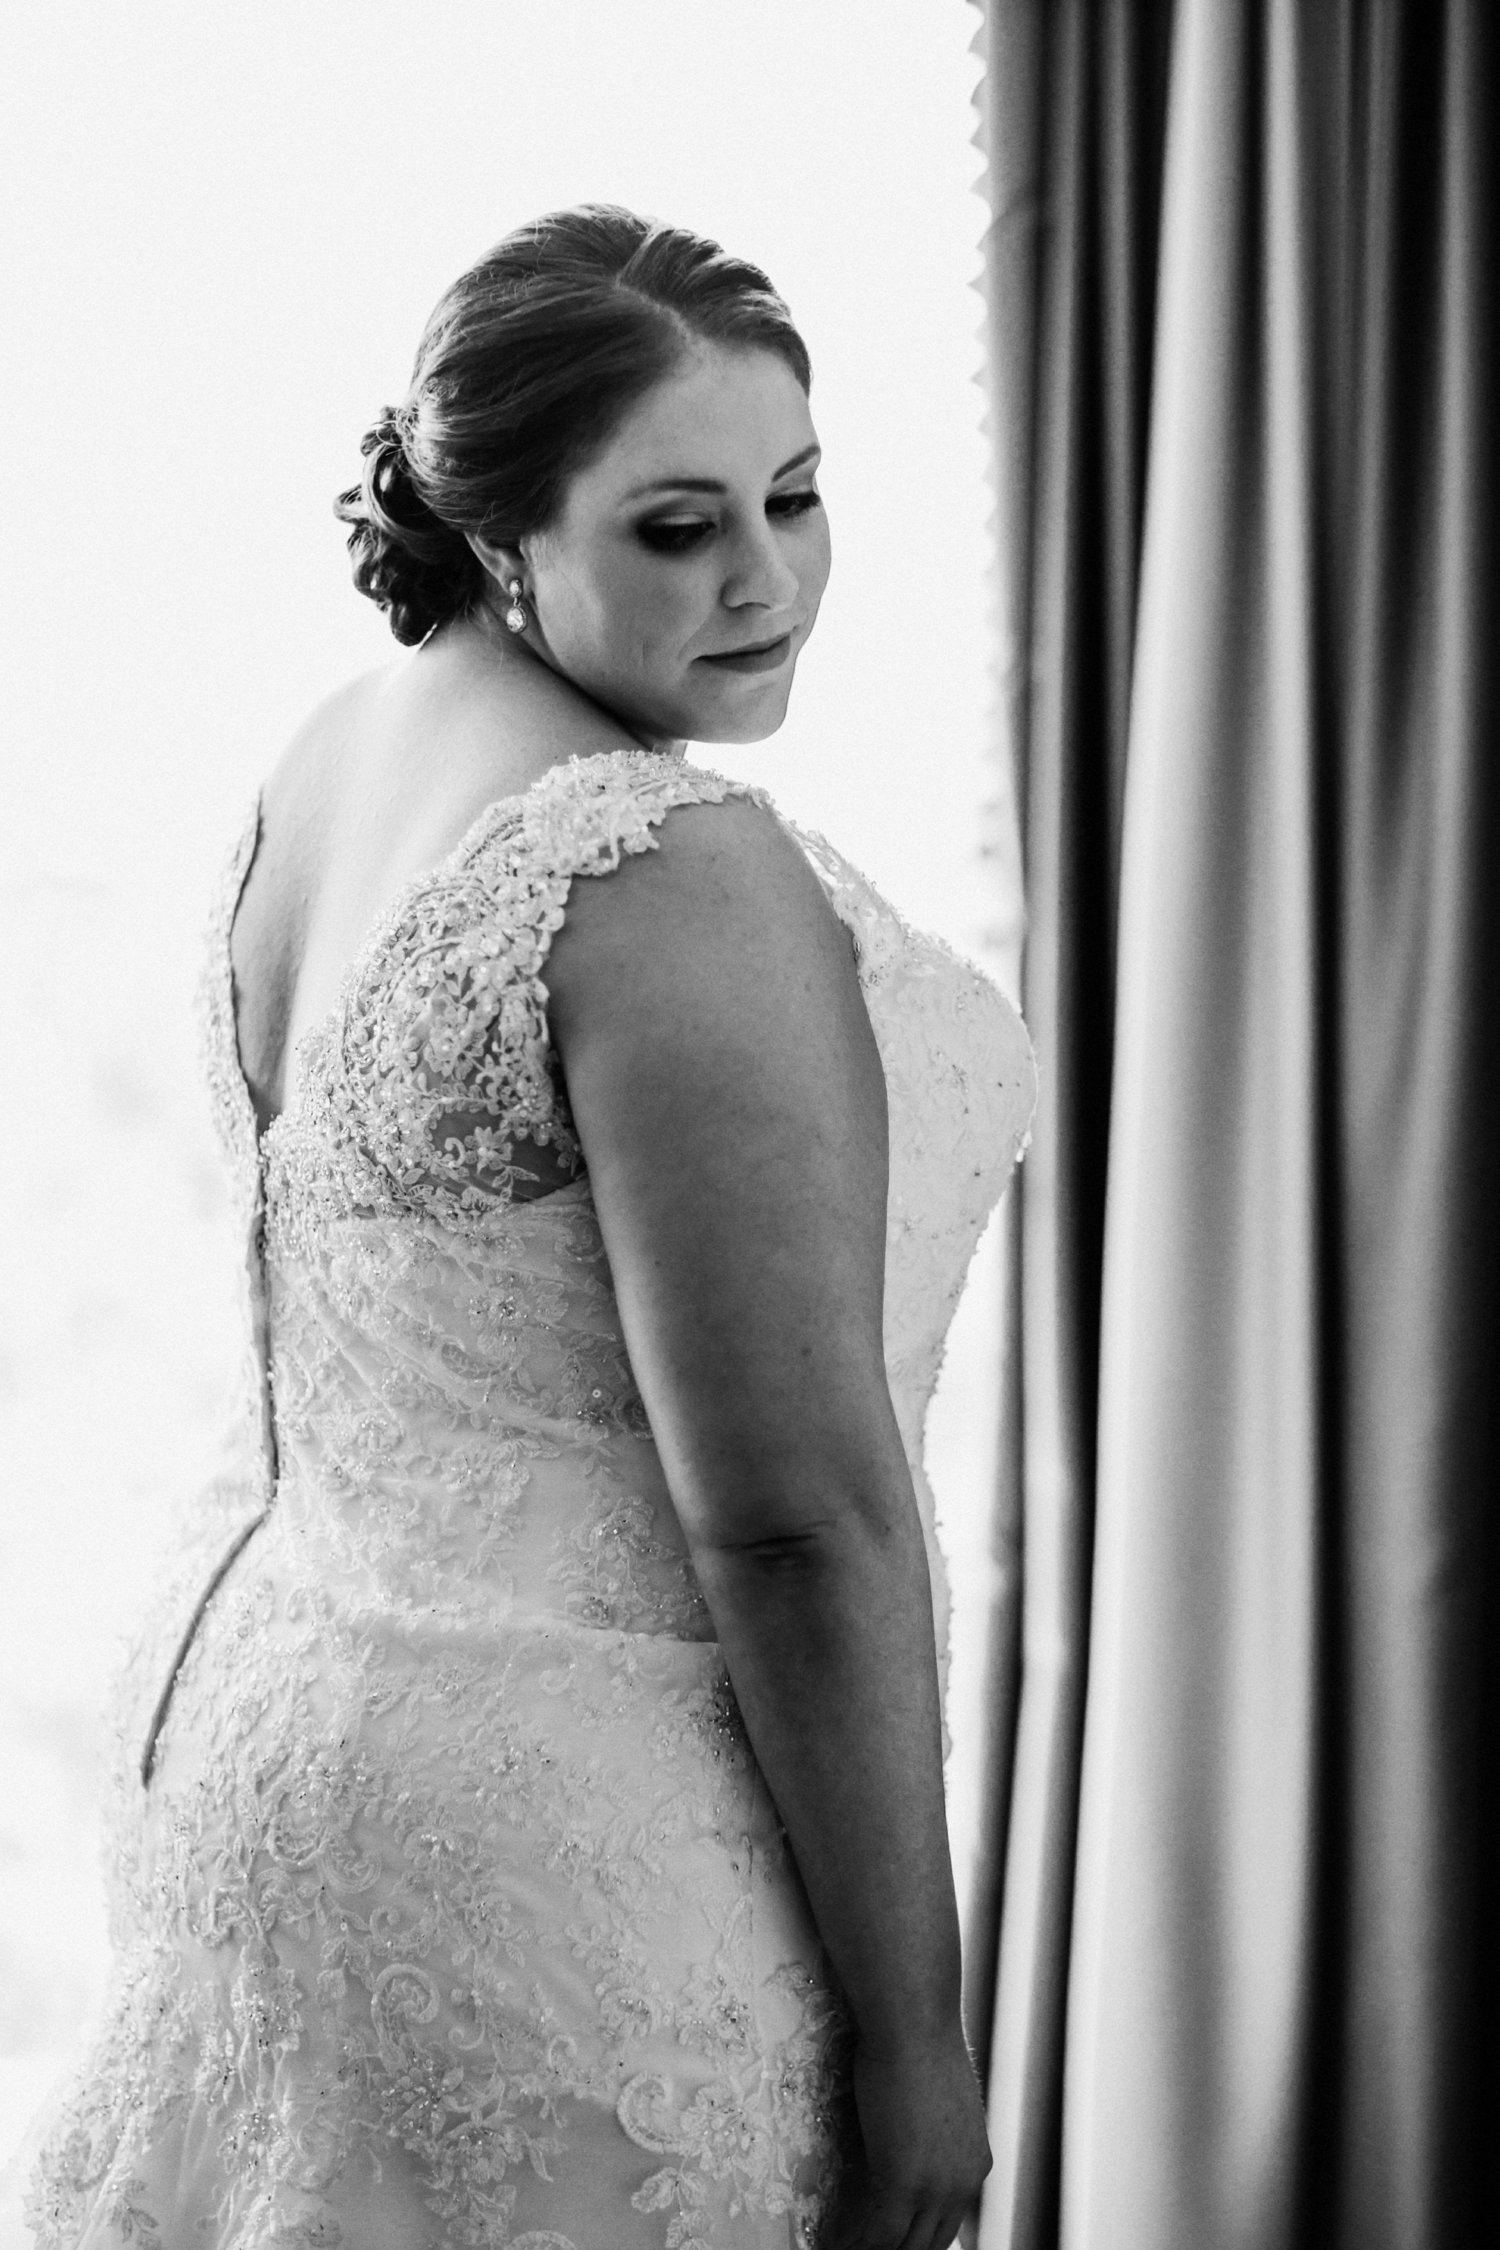  images by feliciathephotographer.com | destination wedding photographer | spring time | carriage club | exclusive | details | getting ready | pre ceremony | black and white | stella york | belle vogue bridal | lace | jhon josephsons salon | hair updo | 